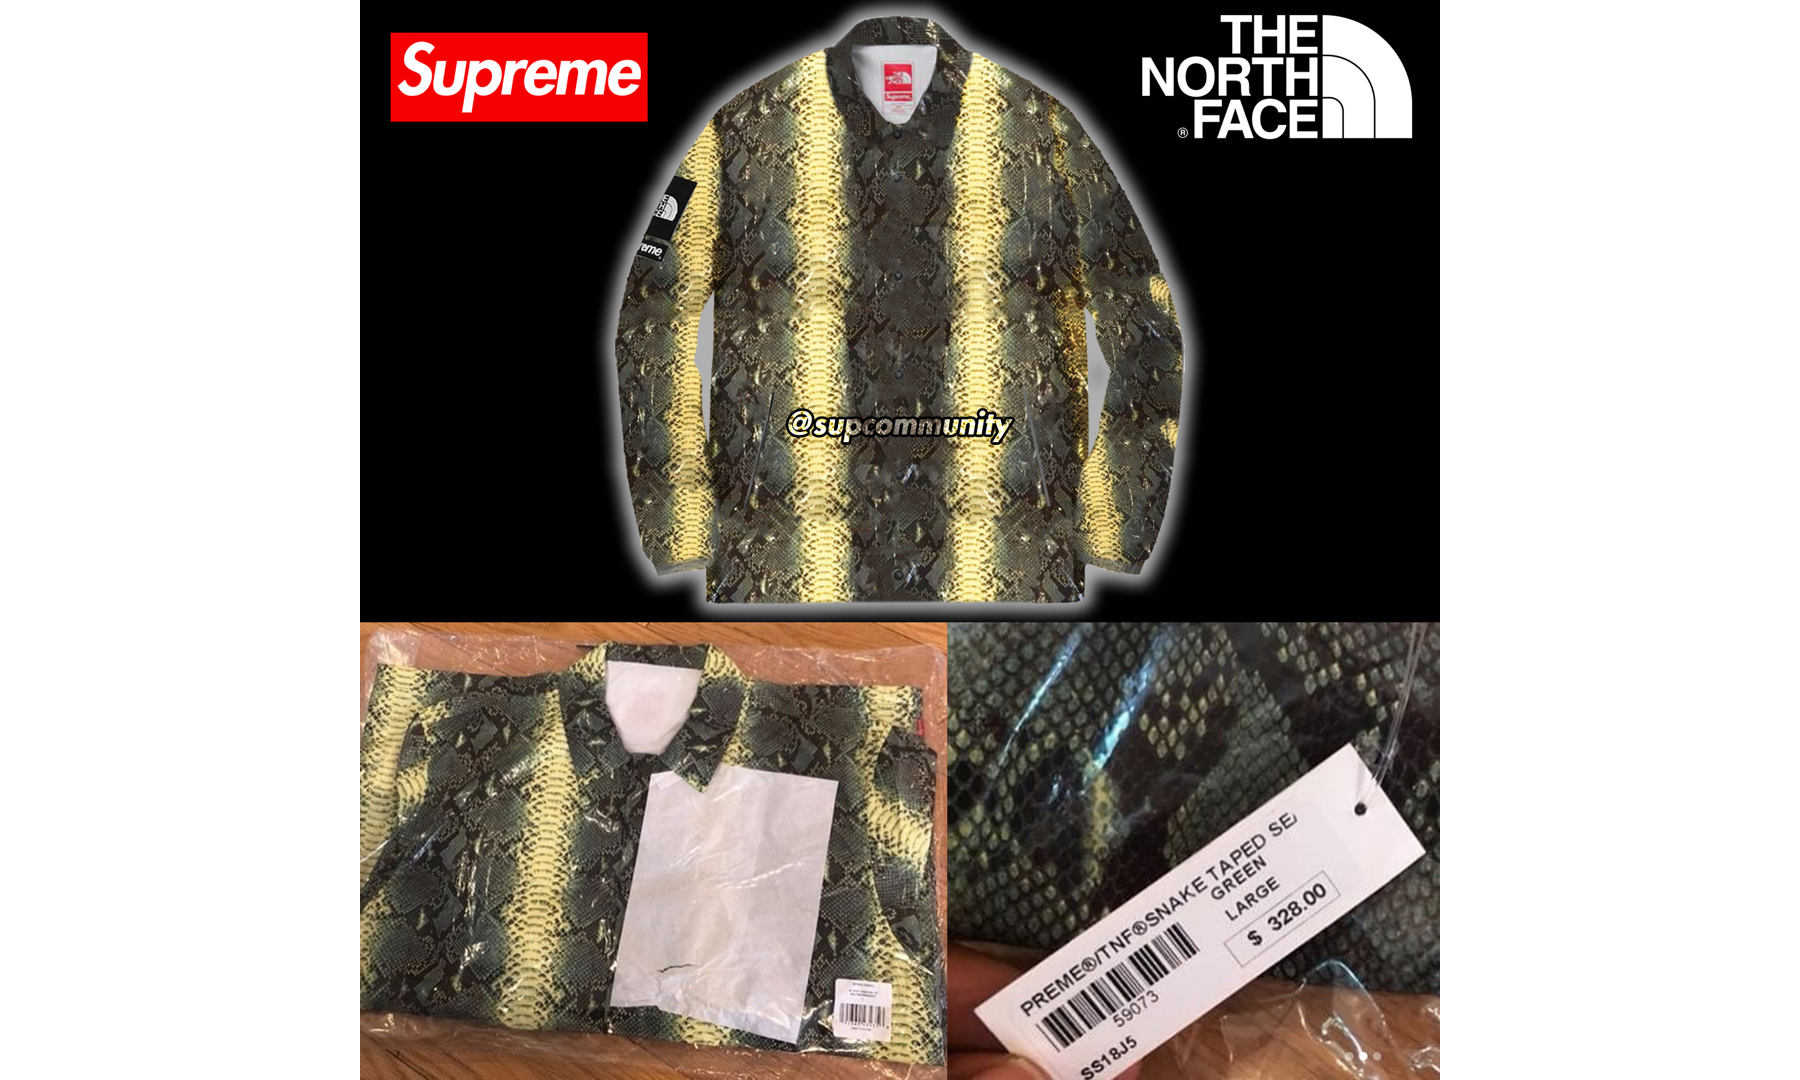 Supreme x THE NORTH FACE 联名系列 Part.2 首件单品曝光